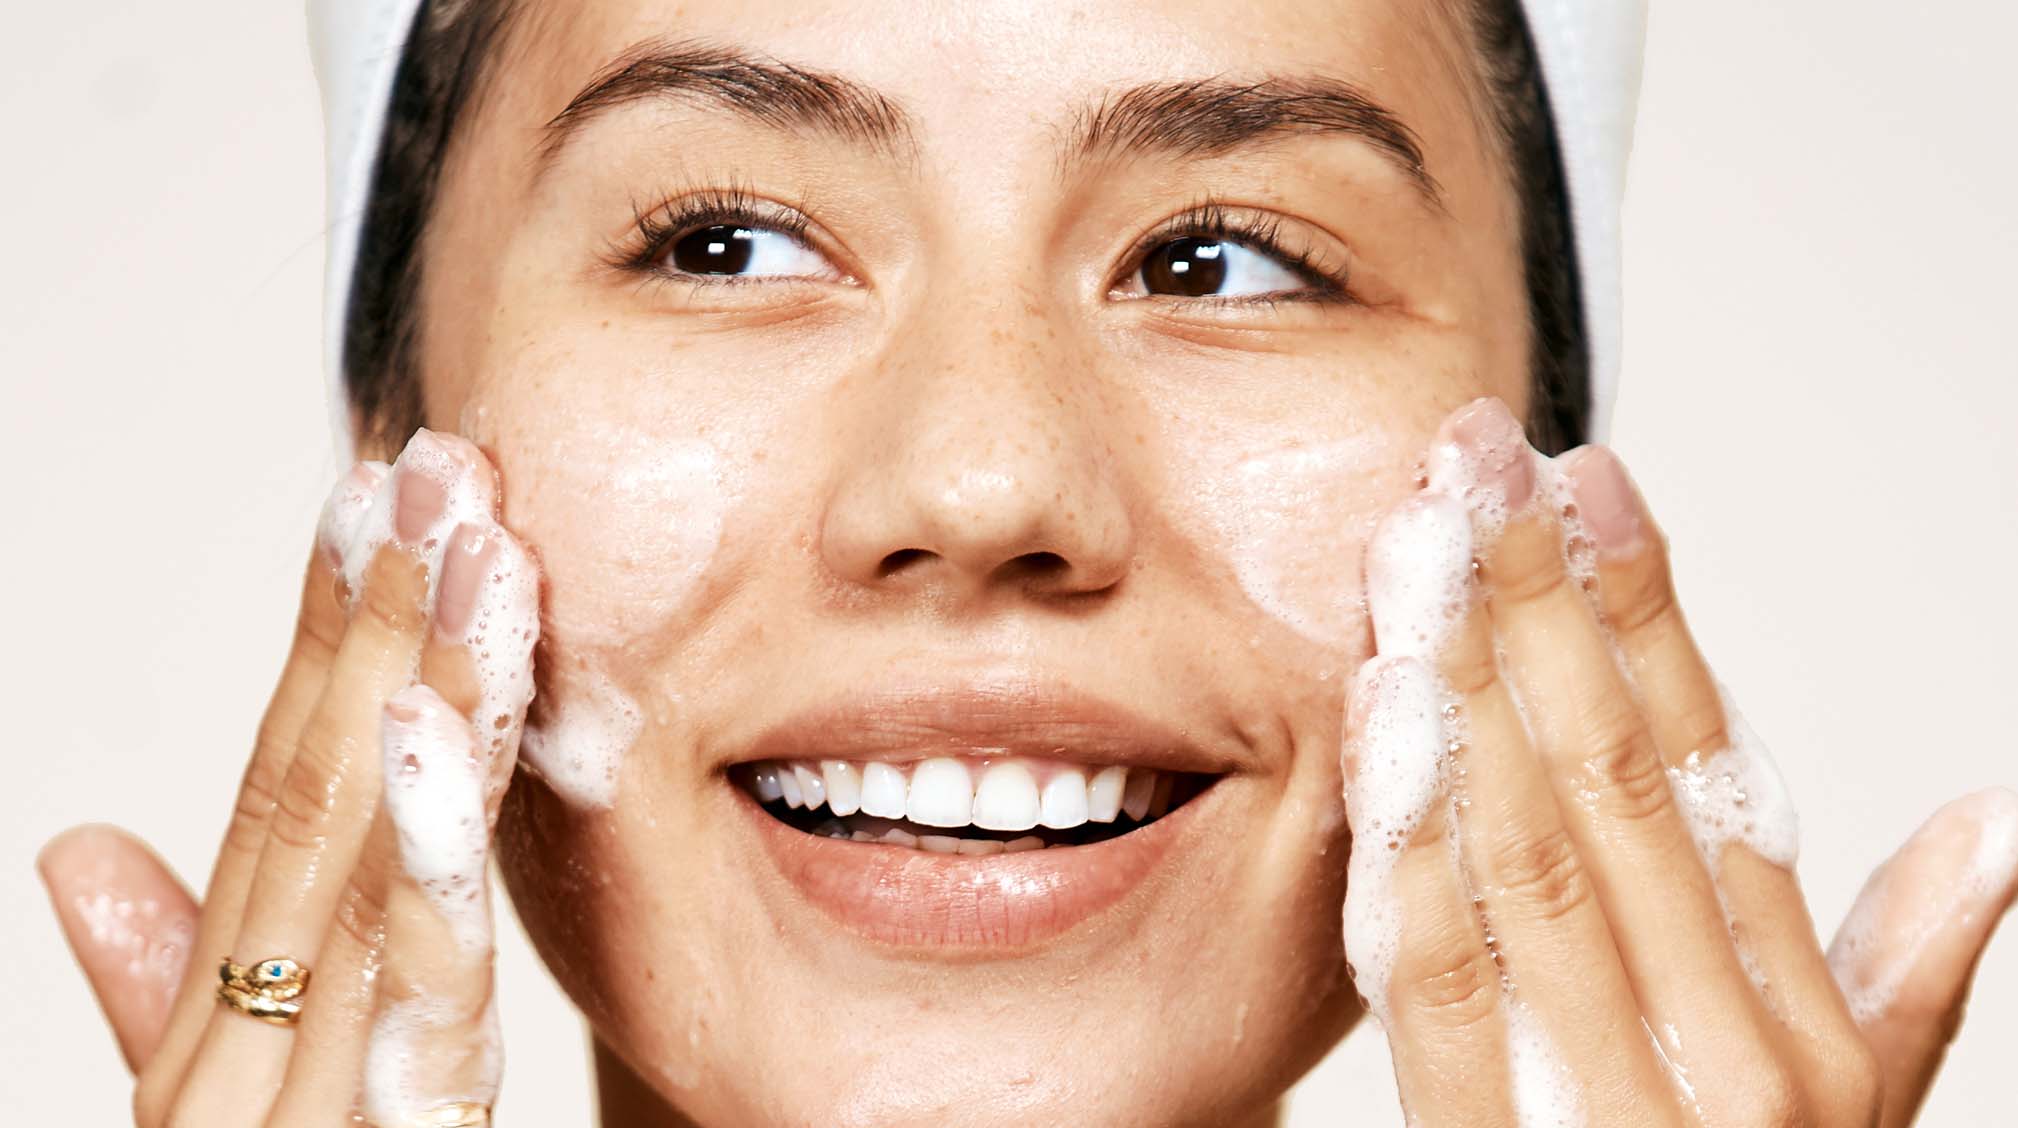 Cleansing 101: The Right Way to Wash Your Face, According to Dermatologists